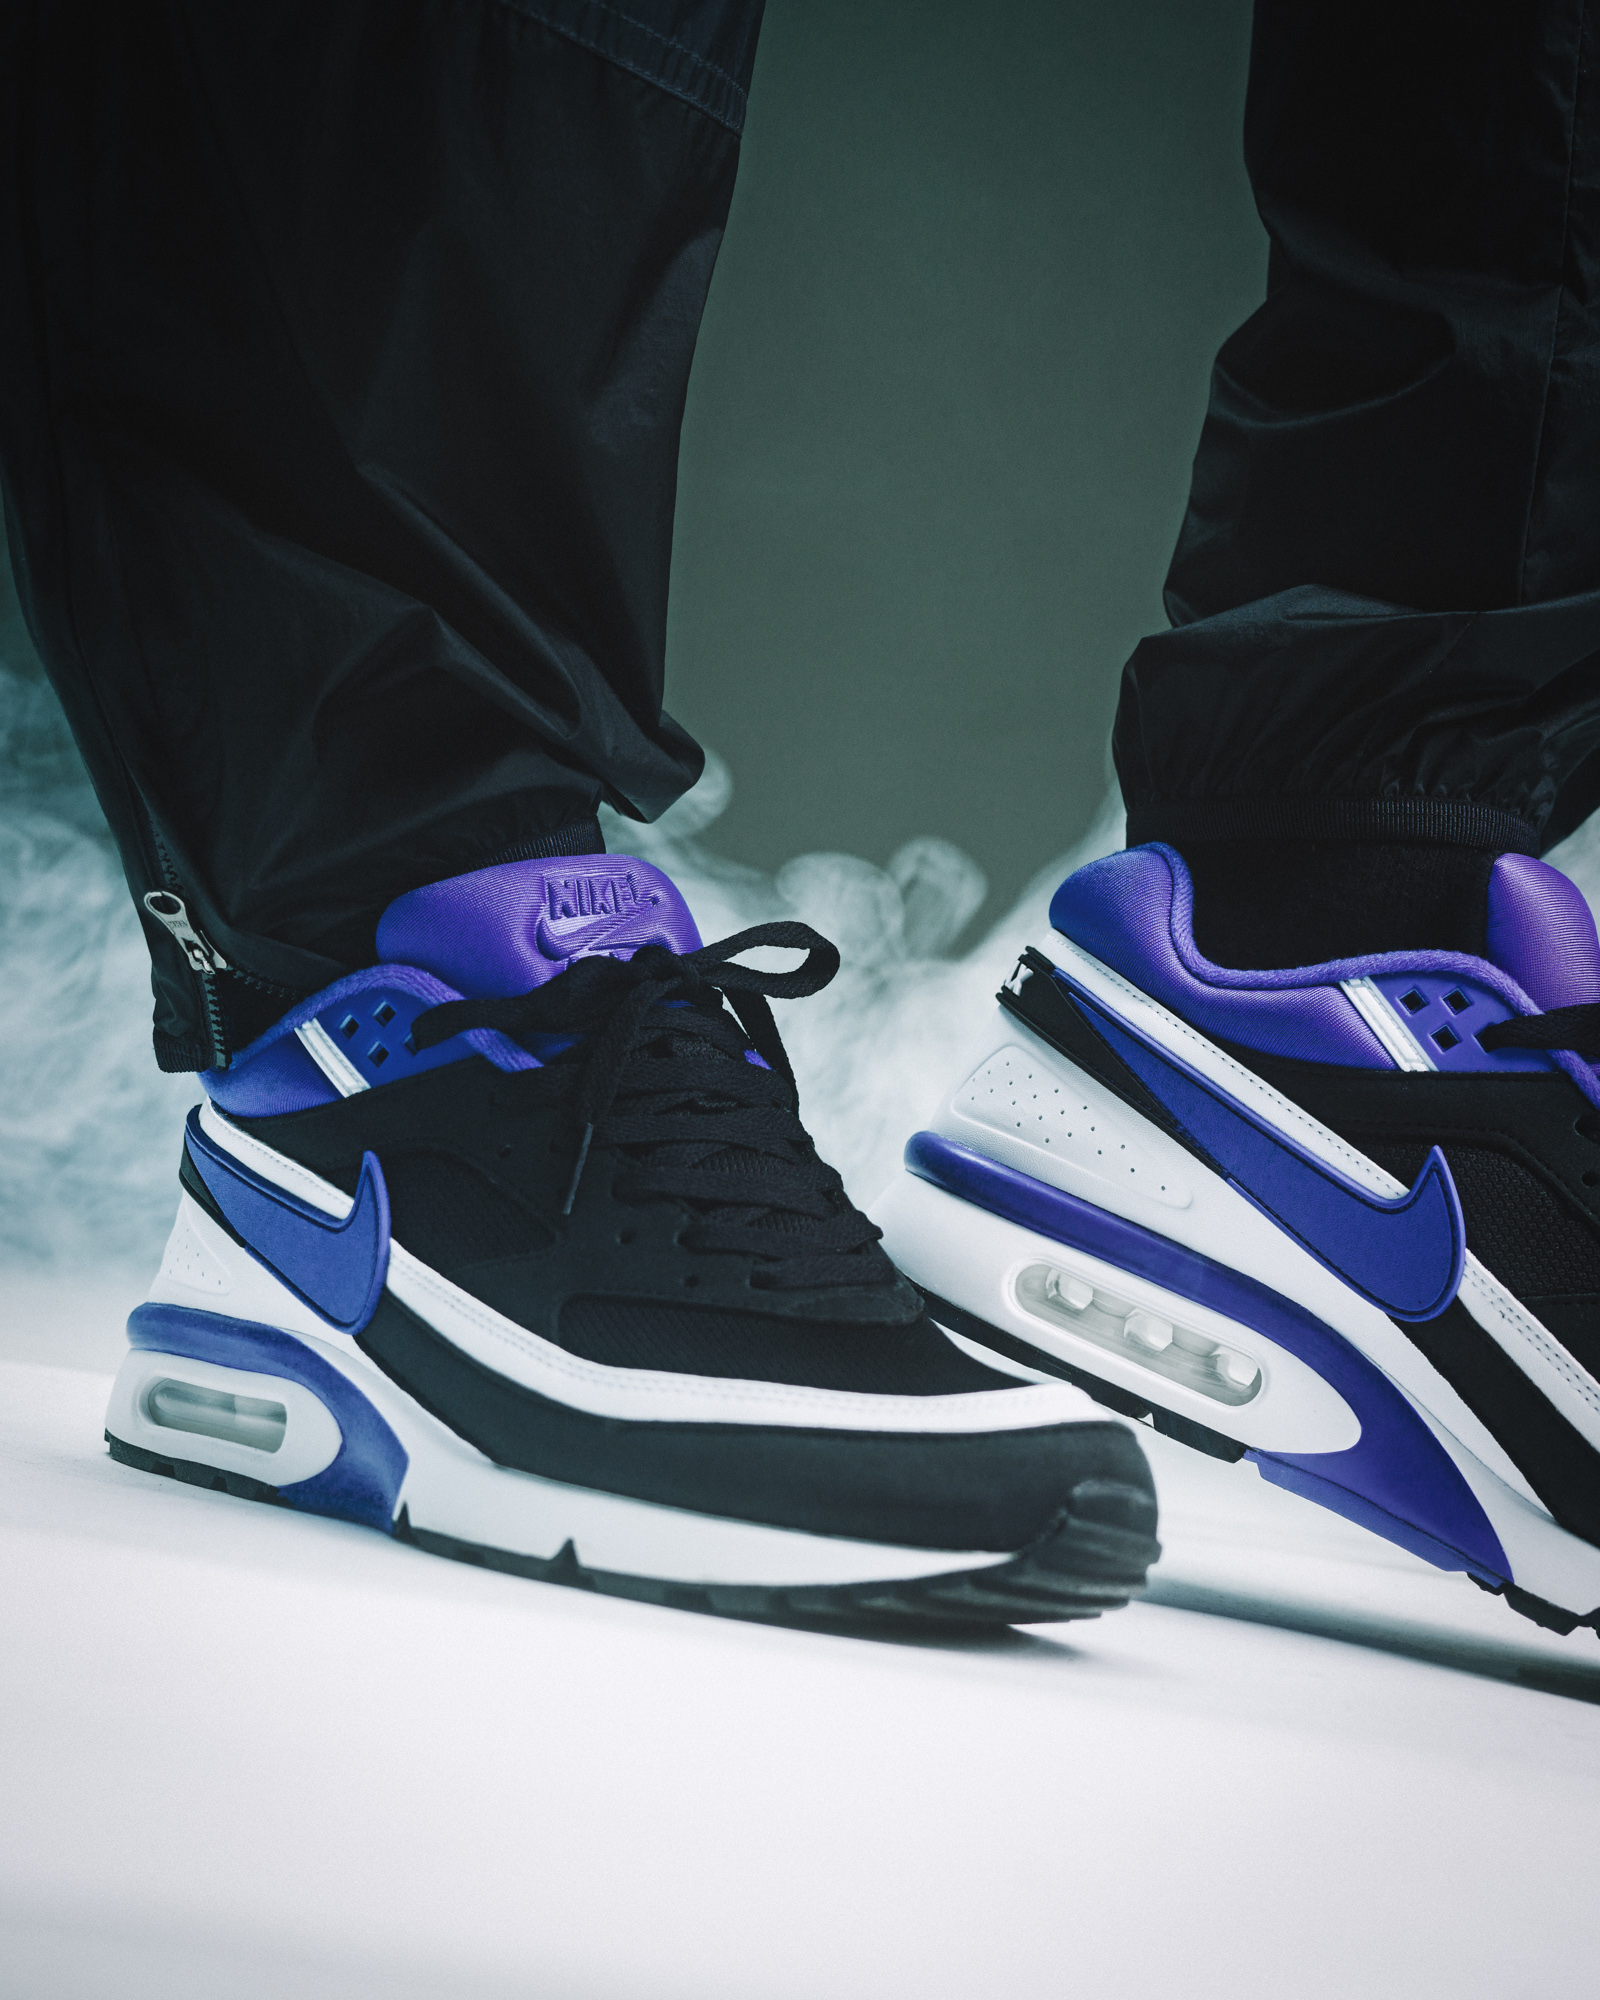 Elektronisch Nauwkeurig Recensent Nike Air Max Classic BW "Persian Violet" - Hardcore since day one -  OVERKILL Blog